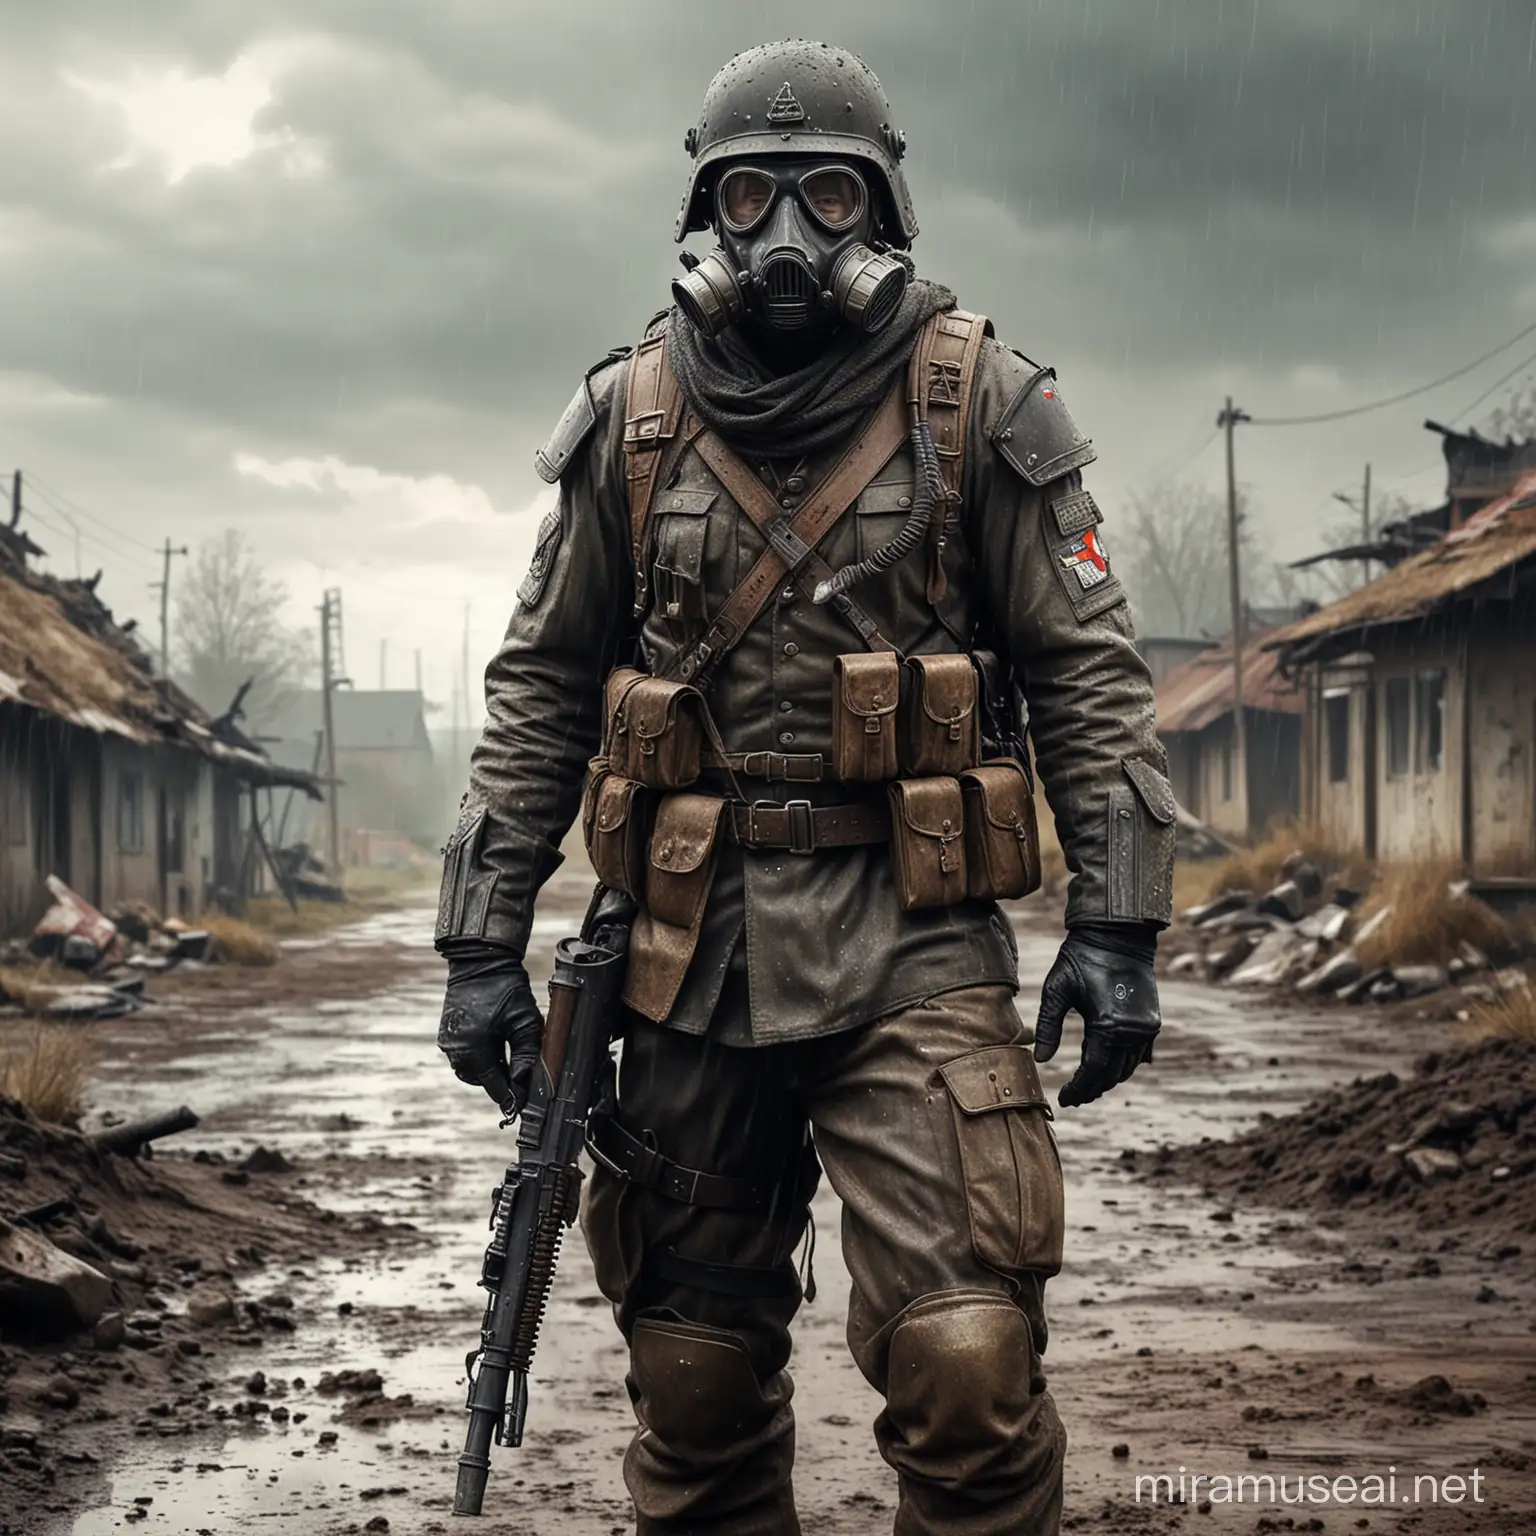 Germany soldier in post post apocalyptic world.Rainy weather,ground is mud.He has armor,helmet with gas mask and gun.Realistic,detailed  